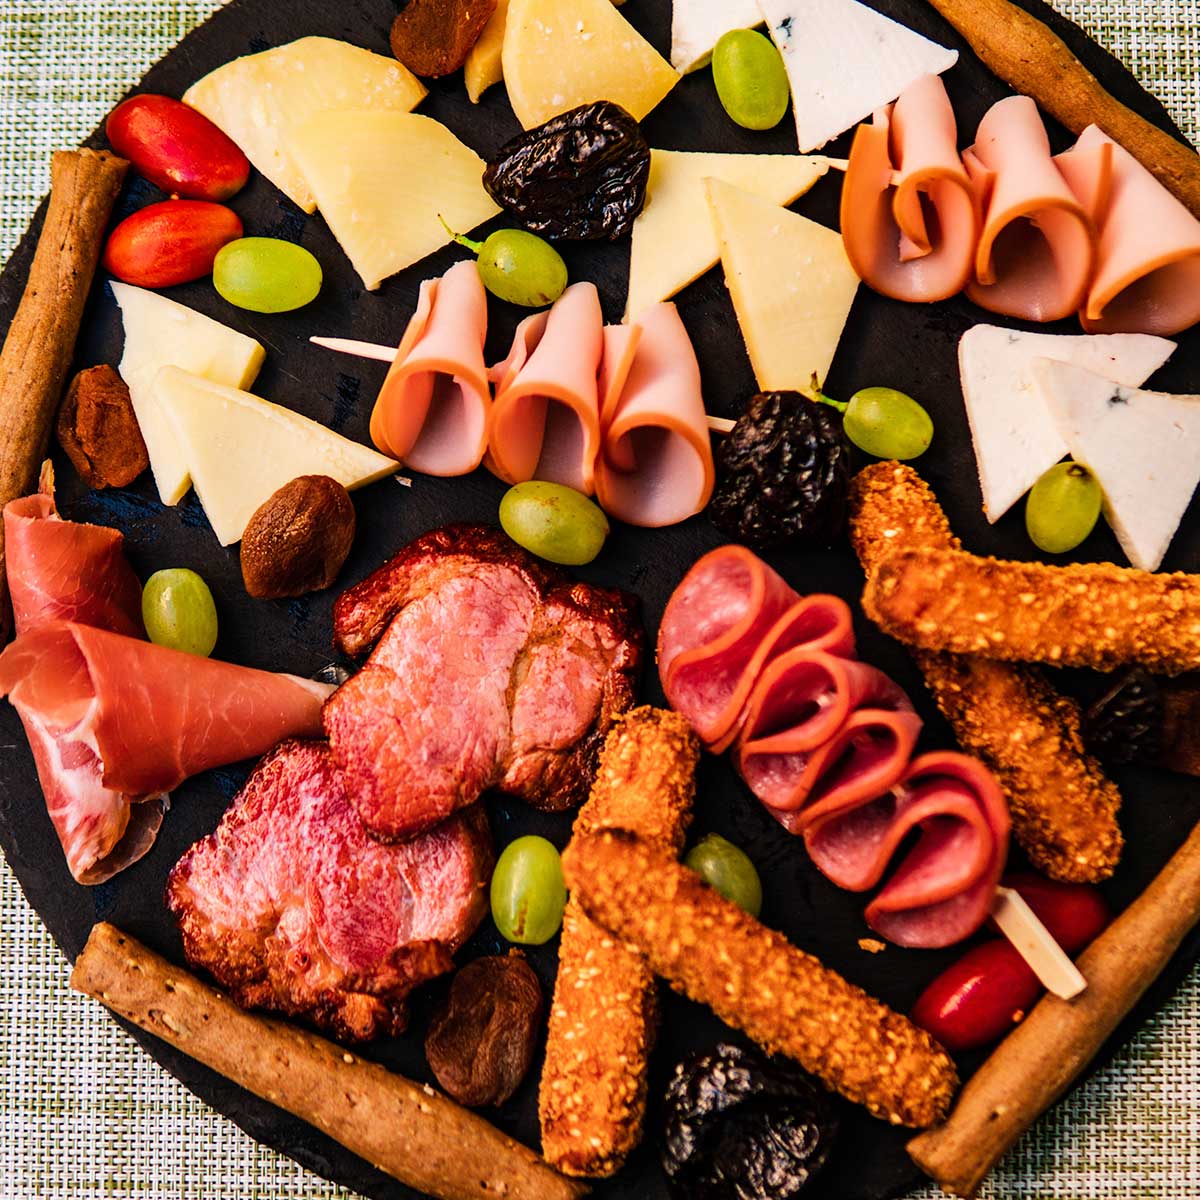 Cheese and meat platter (2 persons)